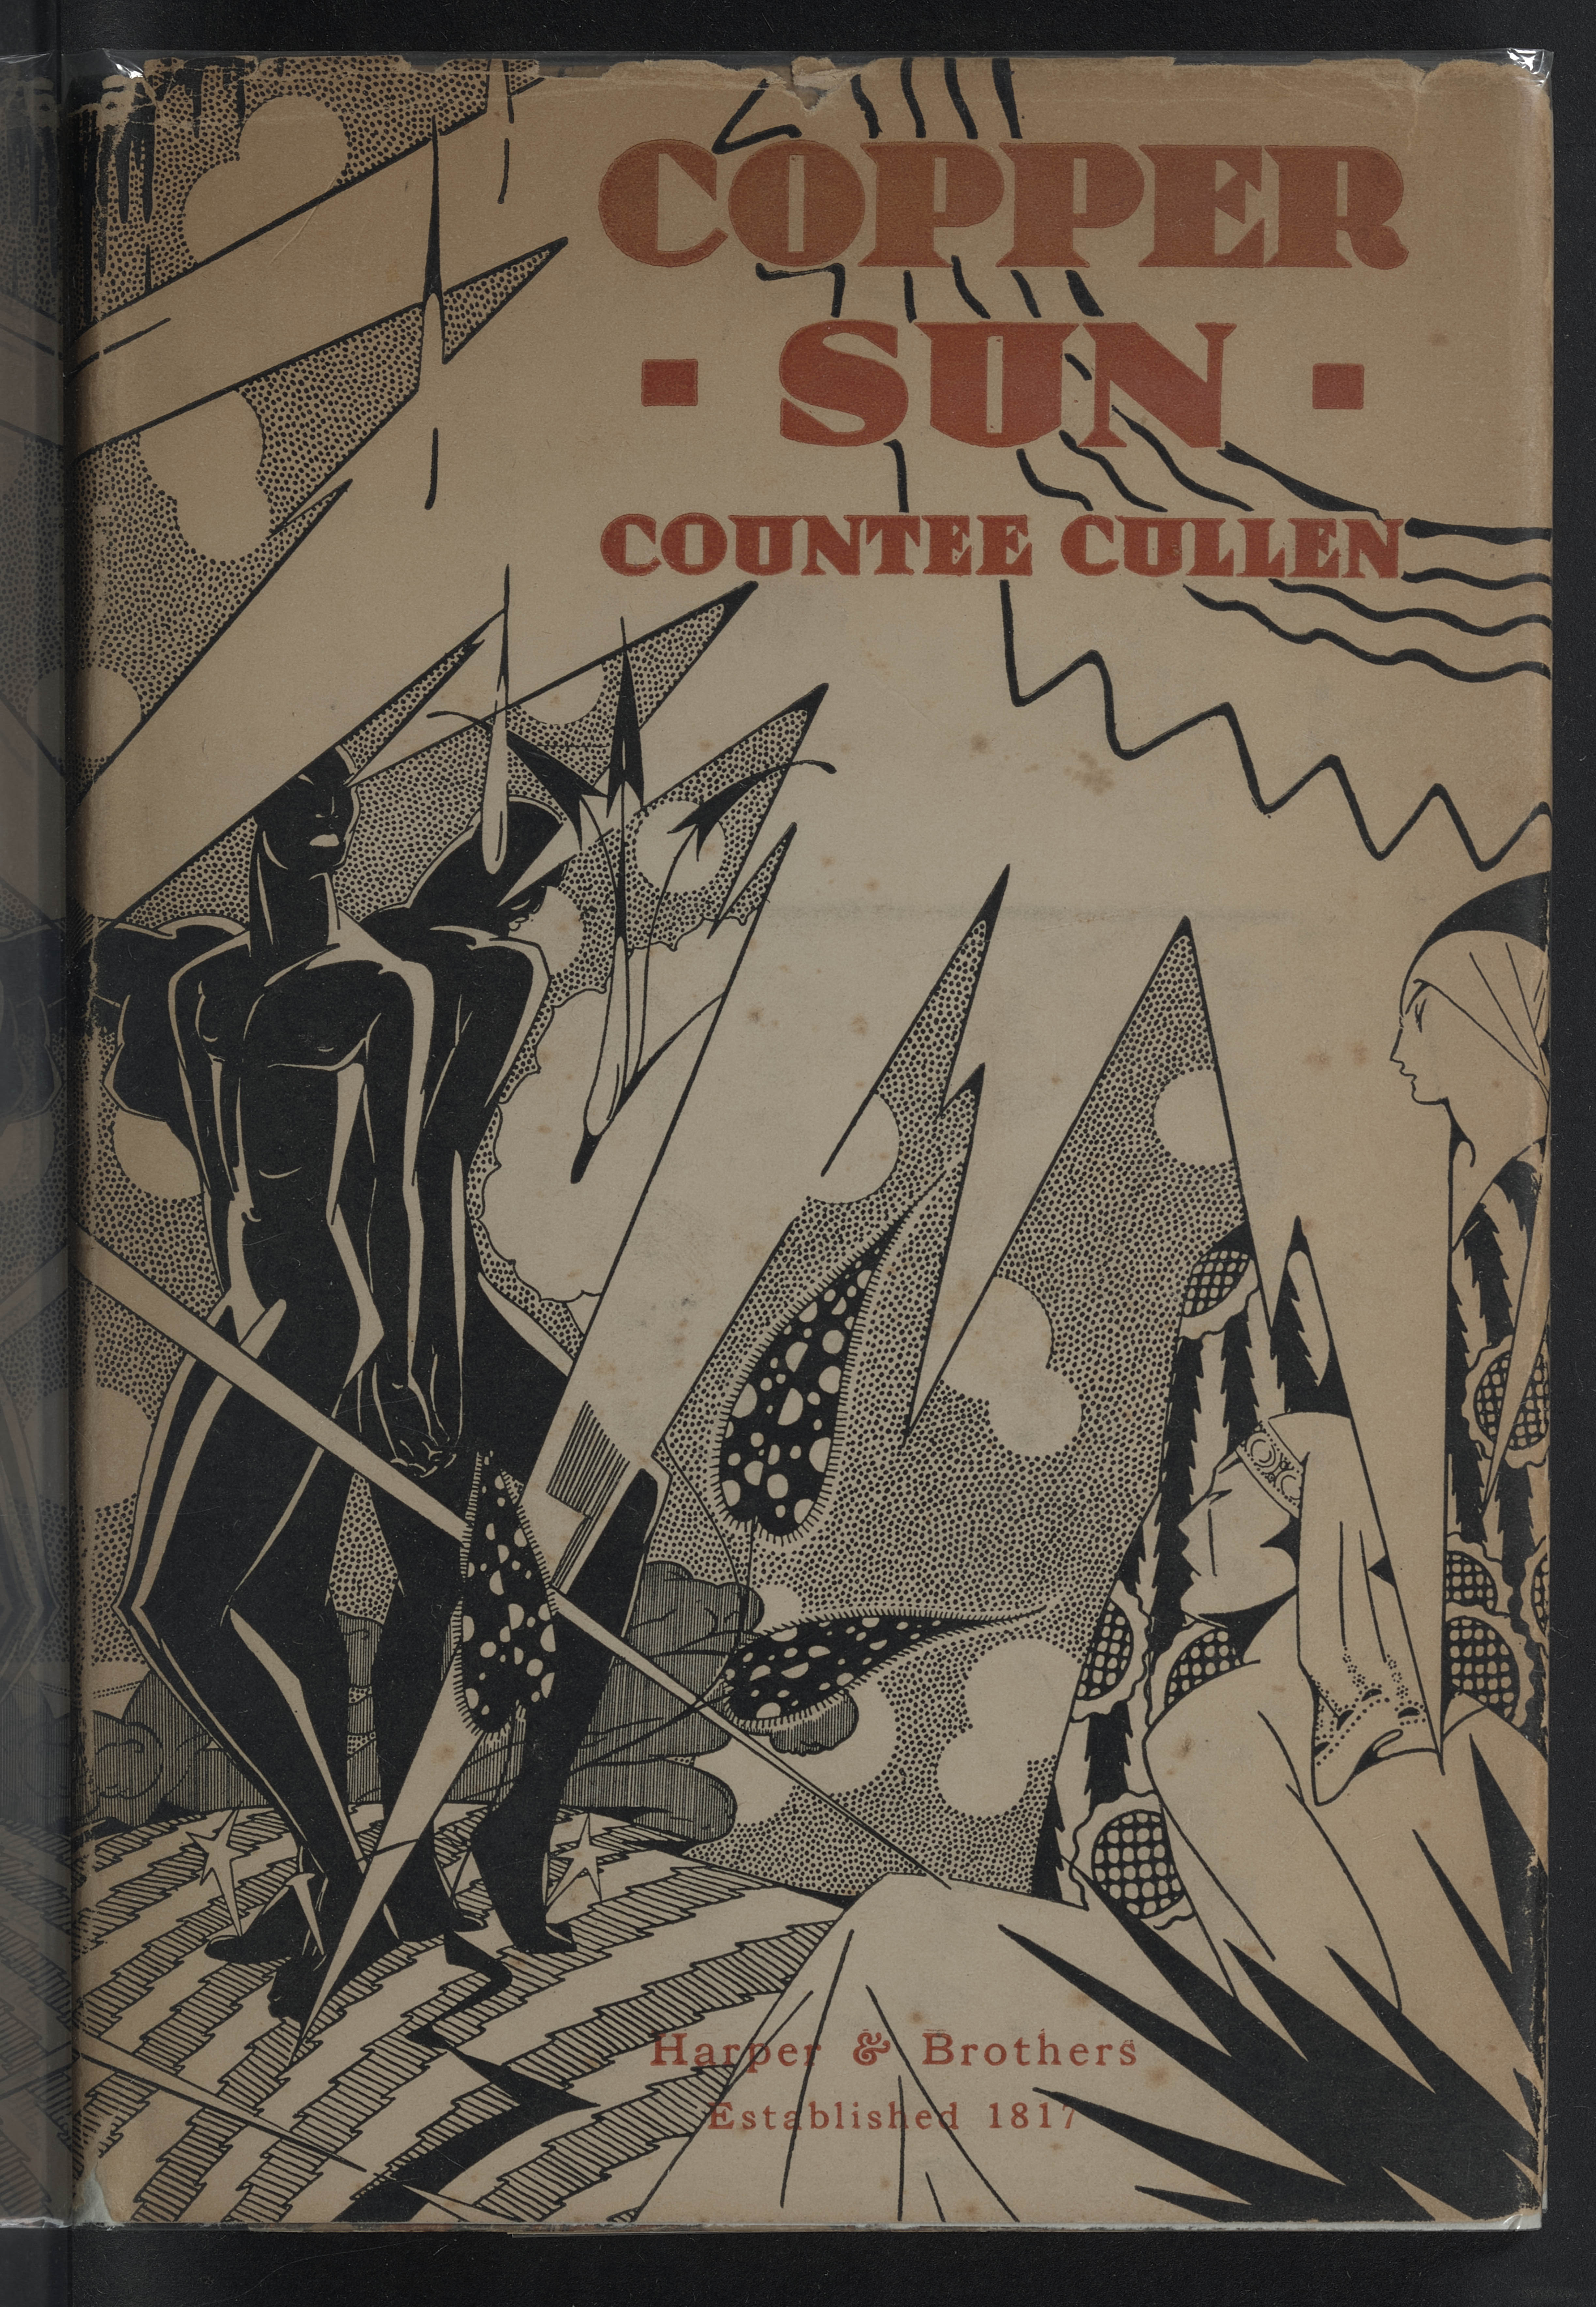 illustrated cover image of “Copper Sun” by Countee Cullen